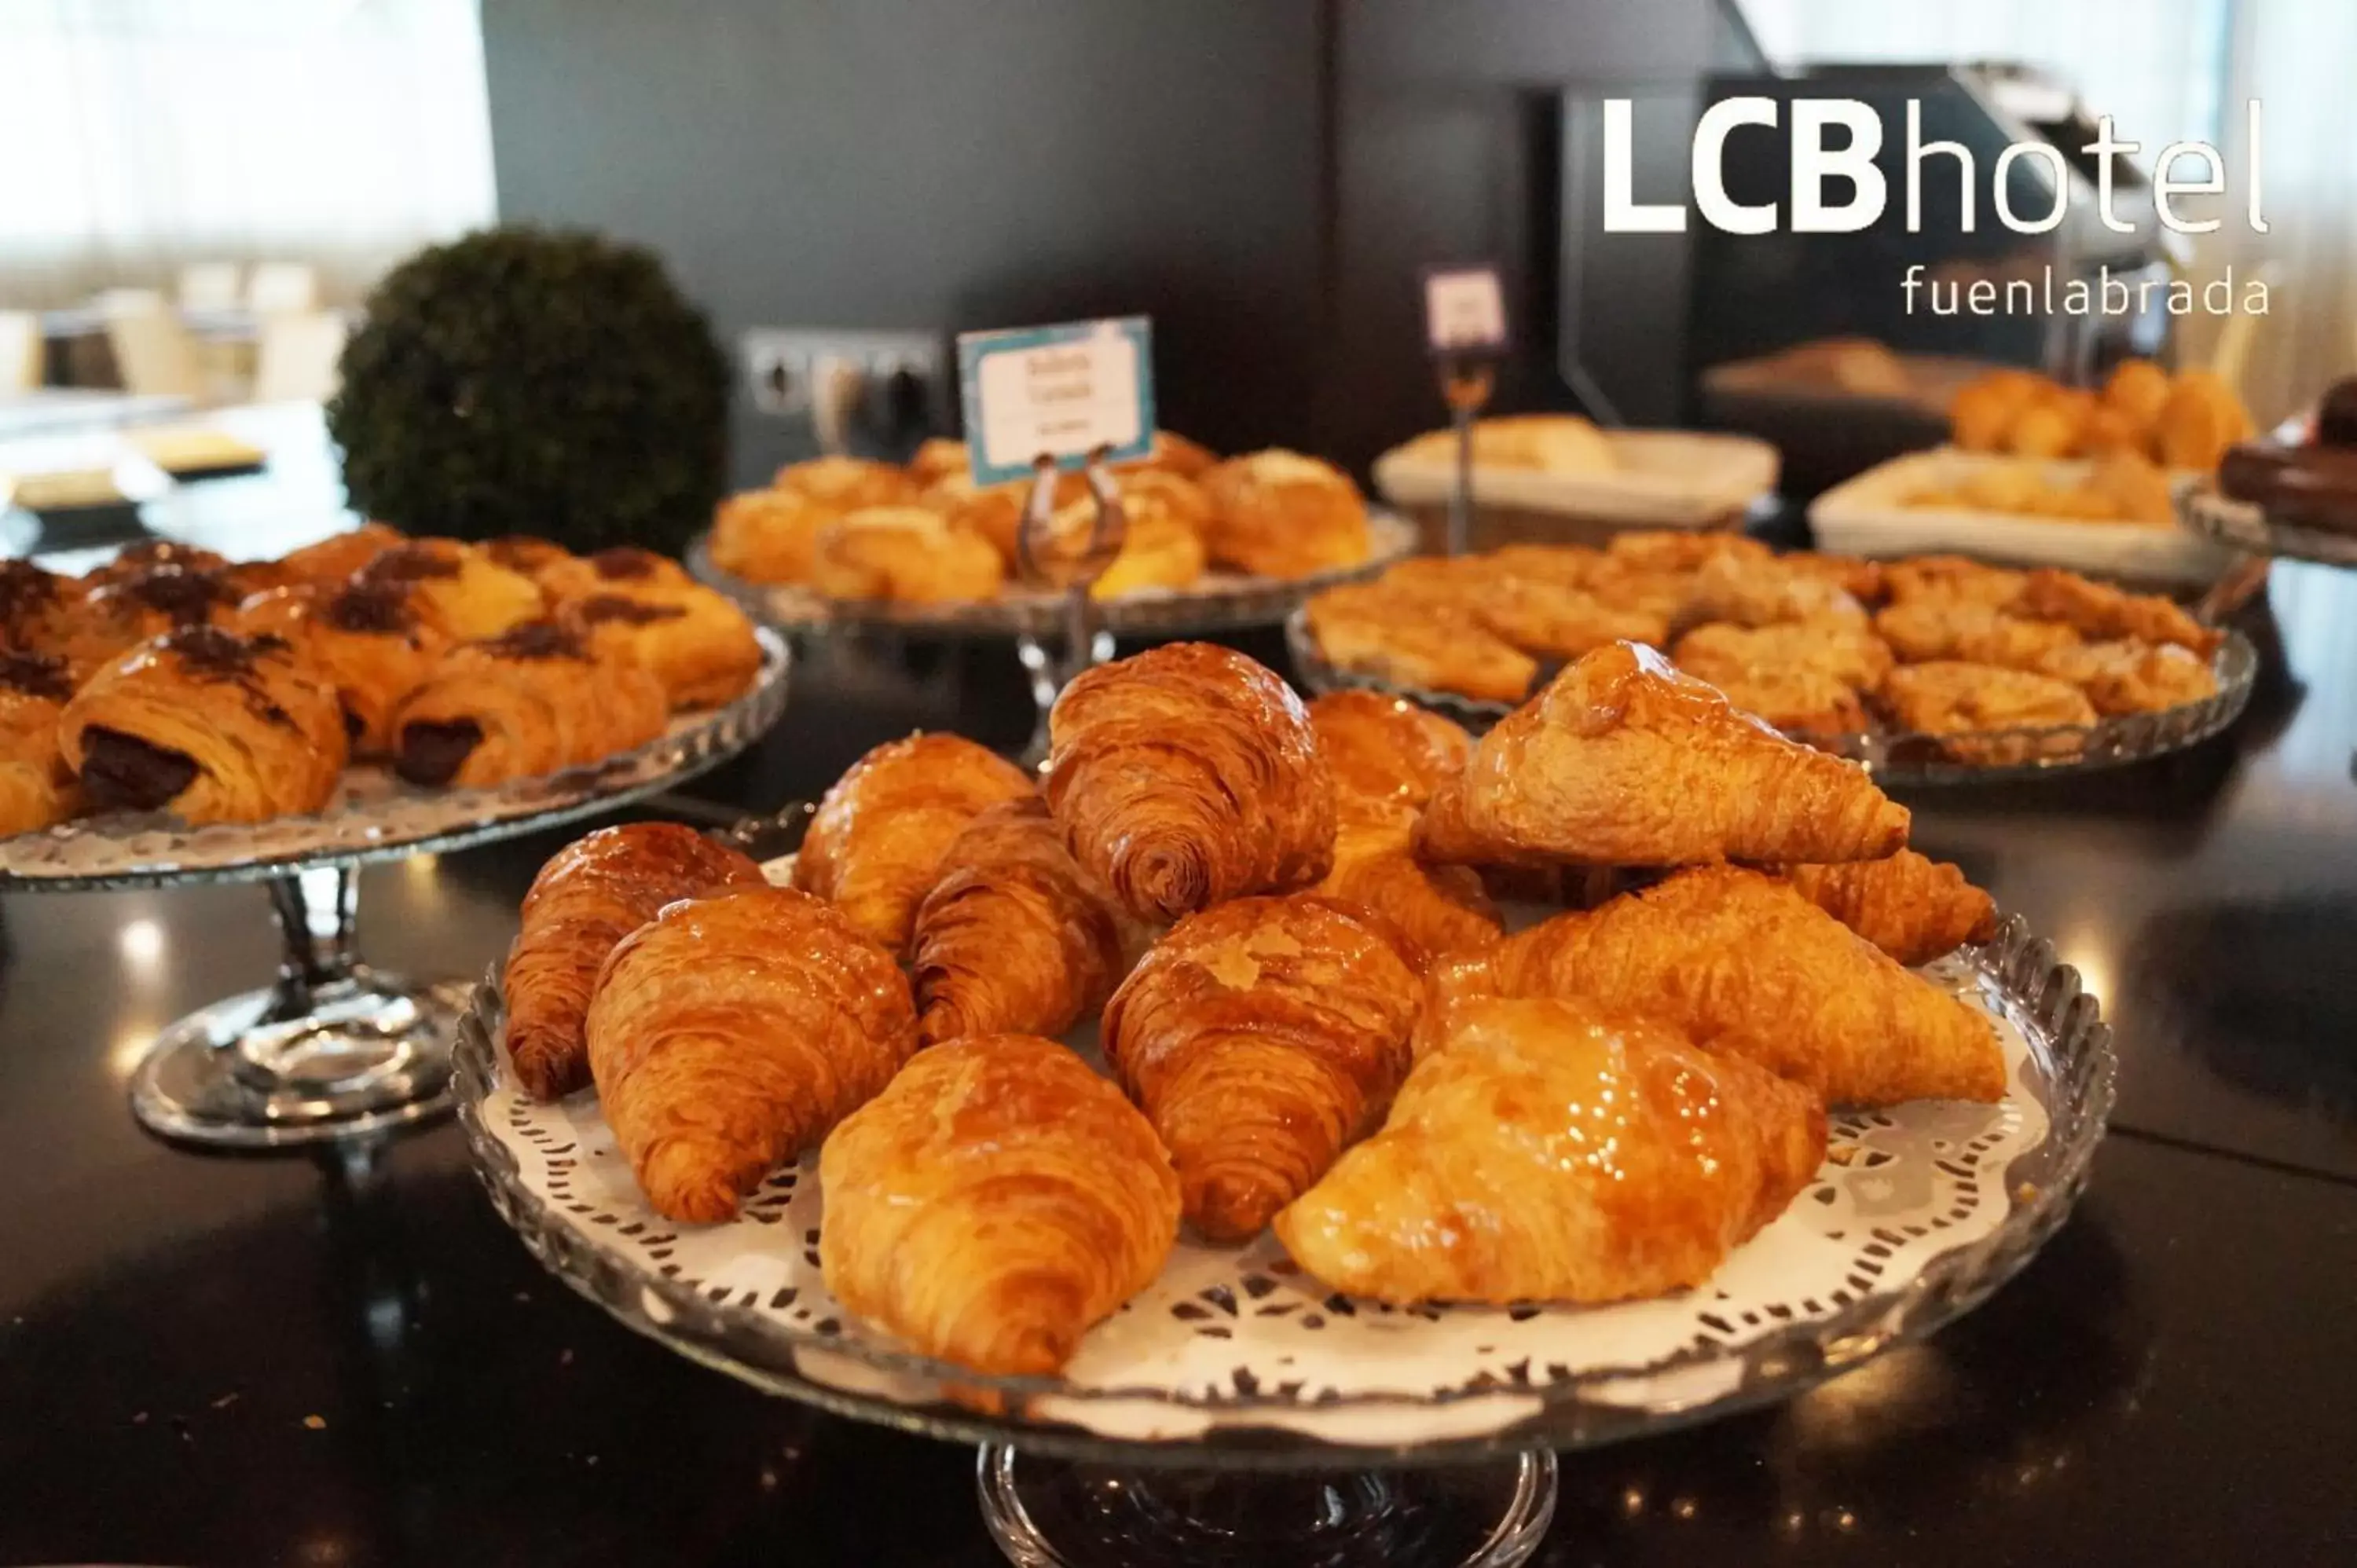 Restaurant/places to eat in LCB Hotel Fuenlabrada